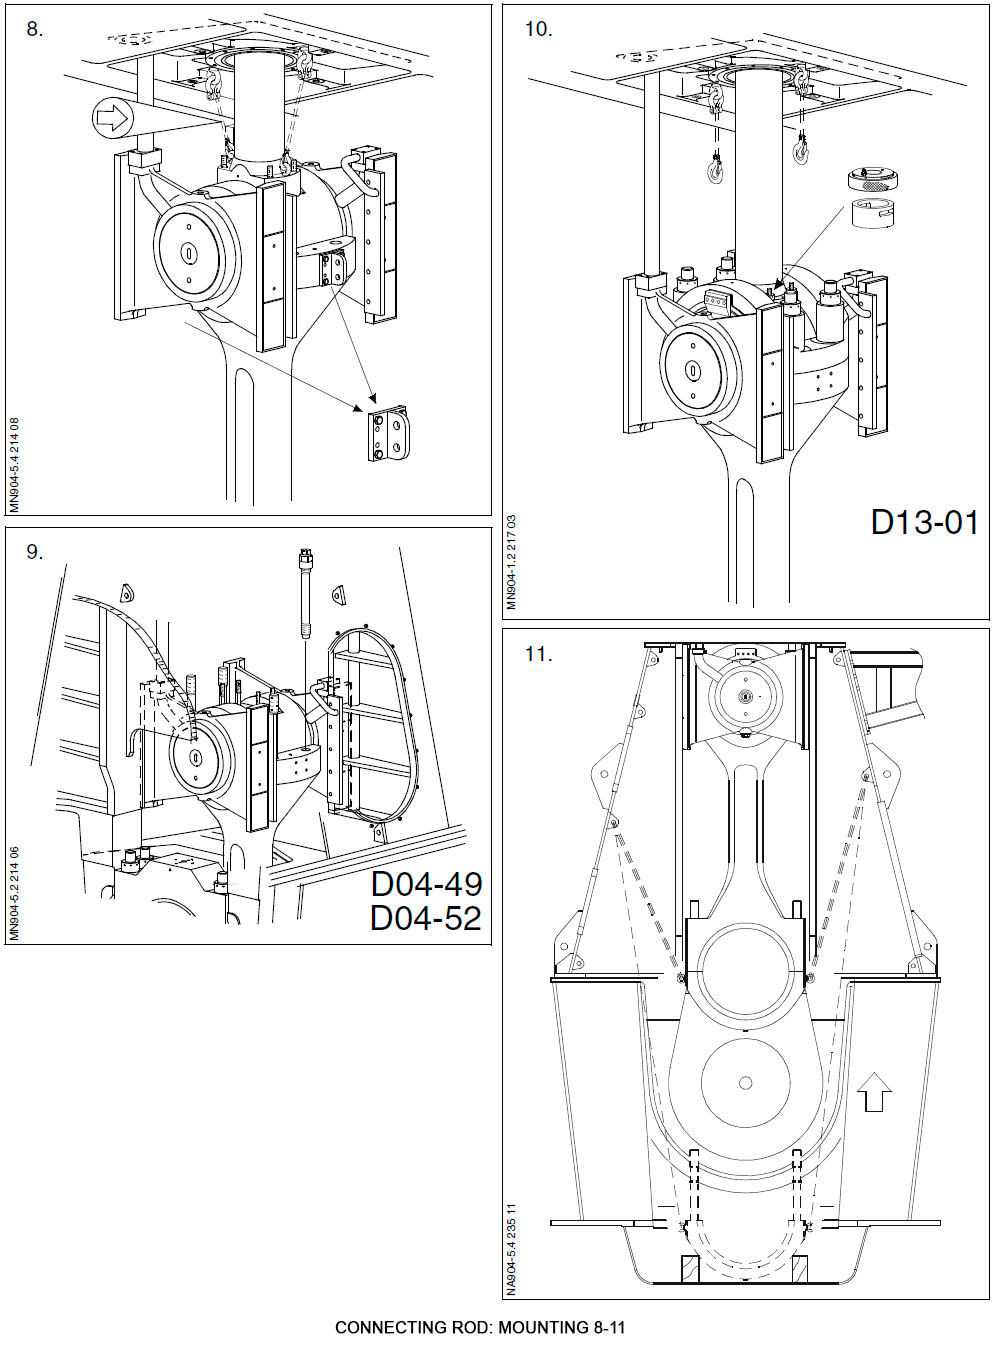 Connecting Rod: Mounting